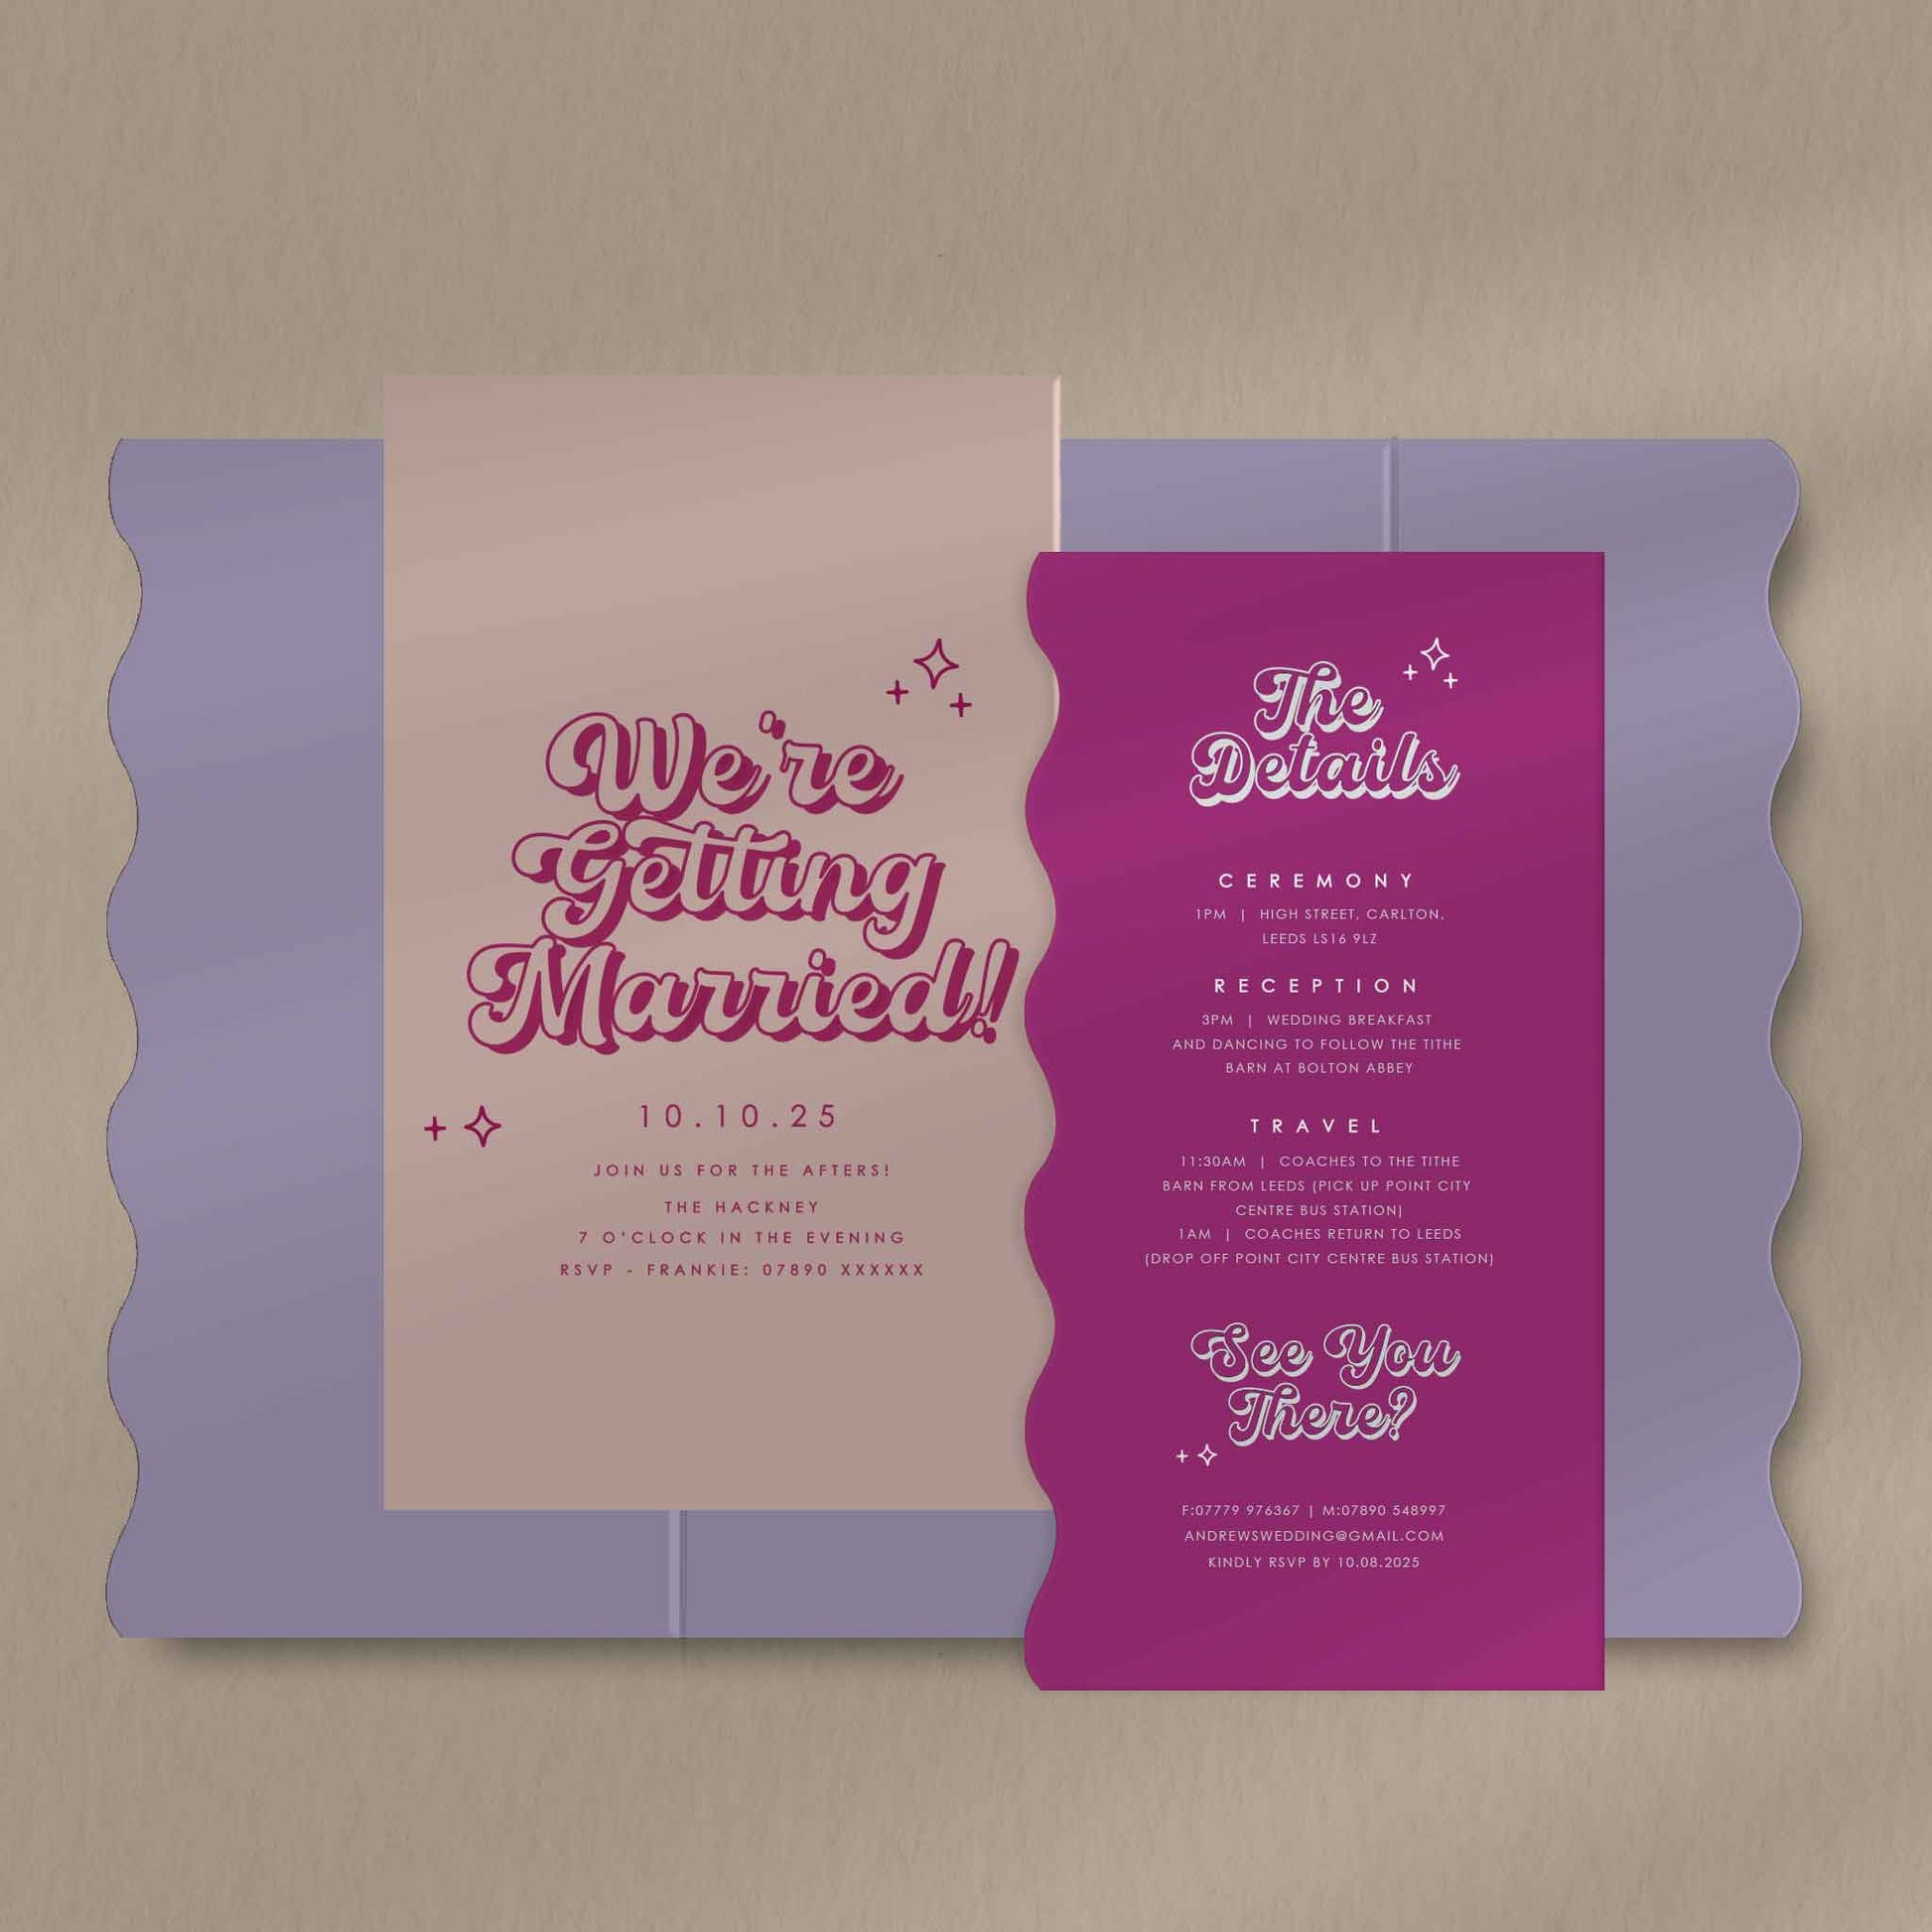 Scallop Envelope Sample  Ivy and Gold Wedding Stationery Frankie  